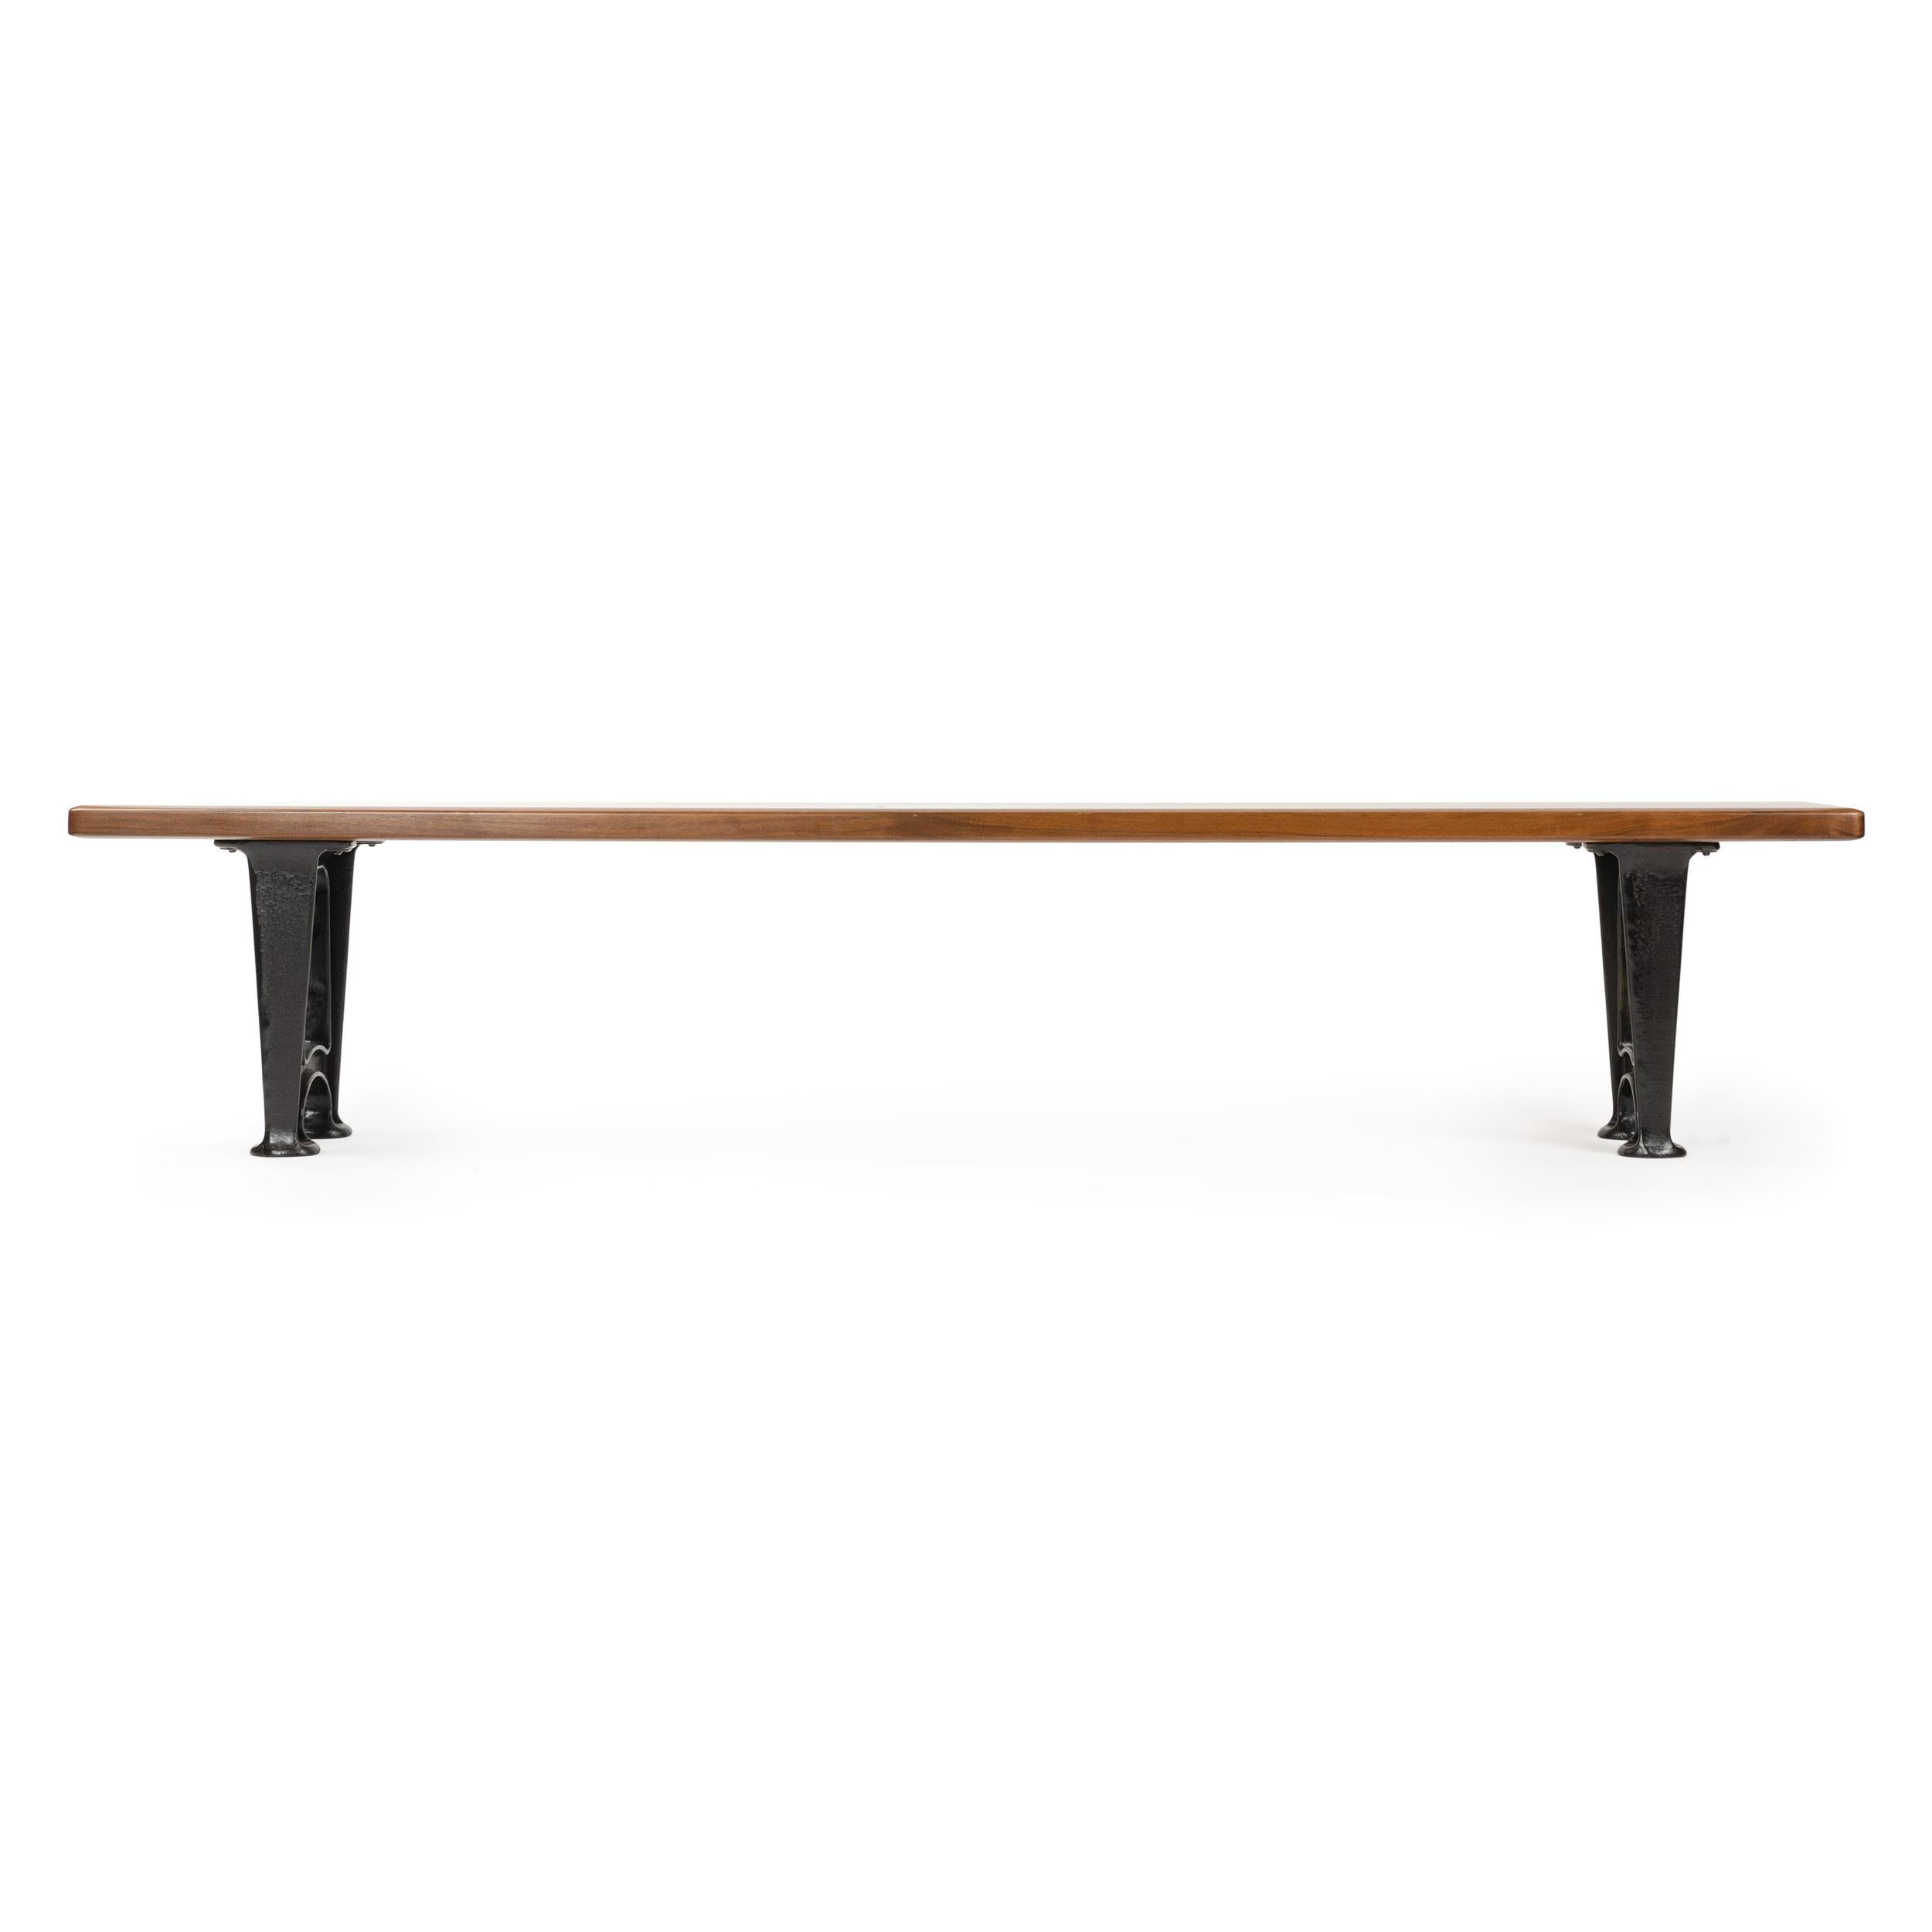 A bench with a solid walnut top on patinated cast iron legs. Custom made by the Wyeth Workshop in NY. Also available in custom lengths, woods and finished.